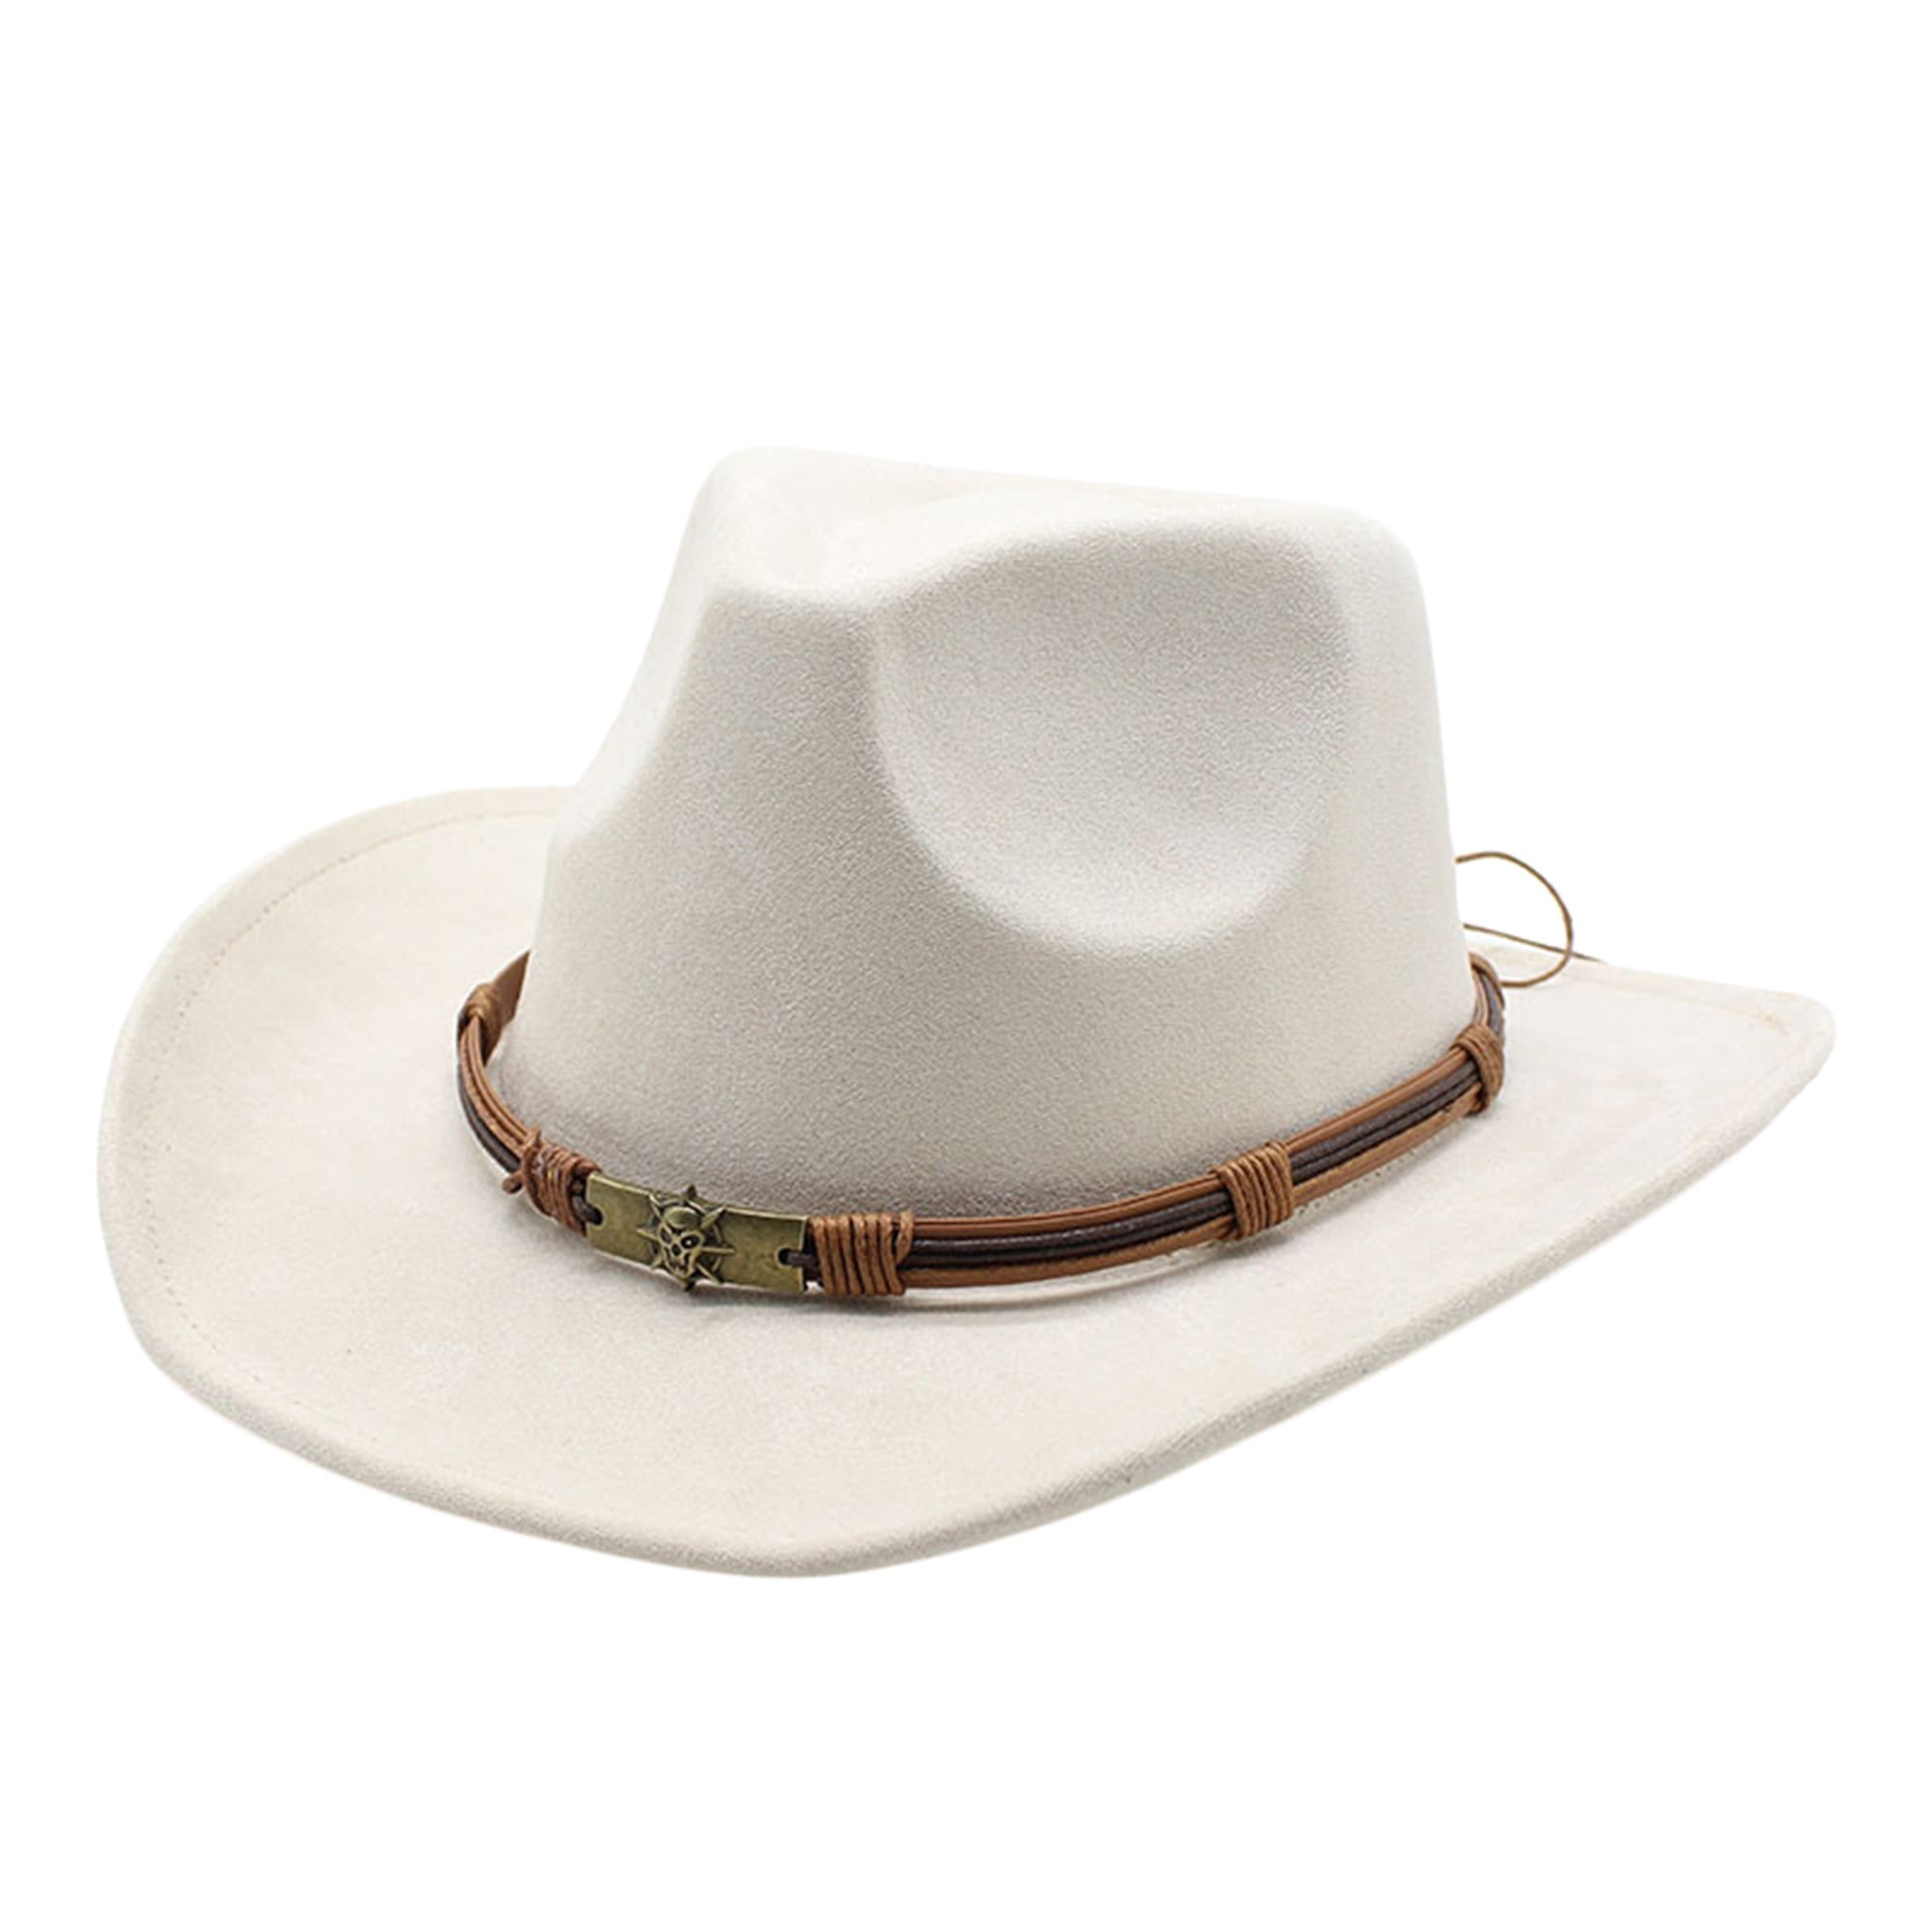 Women Men Western Cowboy Hat Retro Feather Fedora Hat for Hiking Rave Party  Travel Costume Accessories 